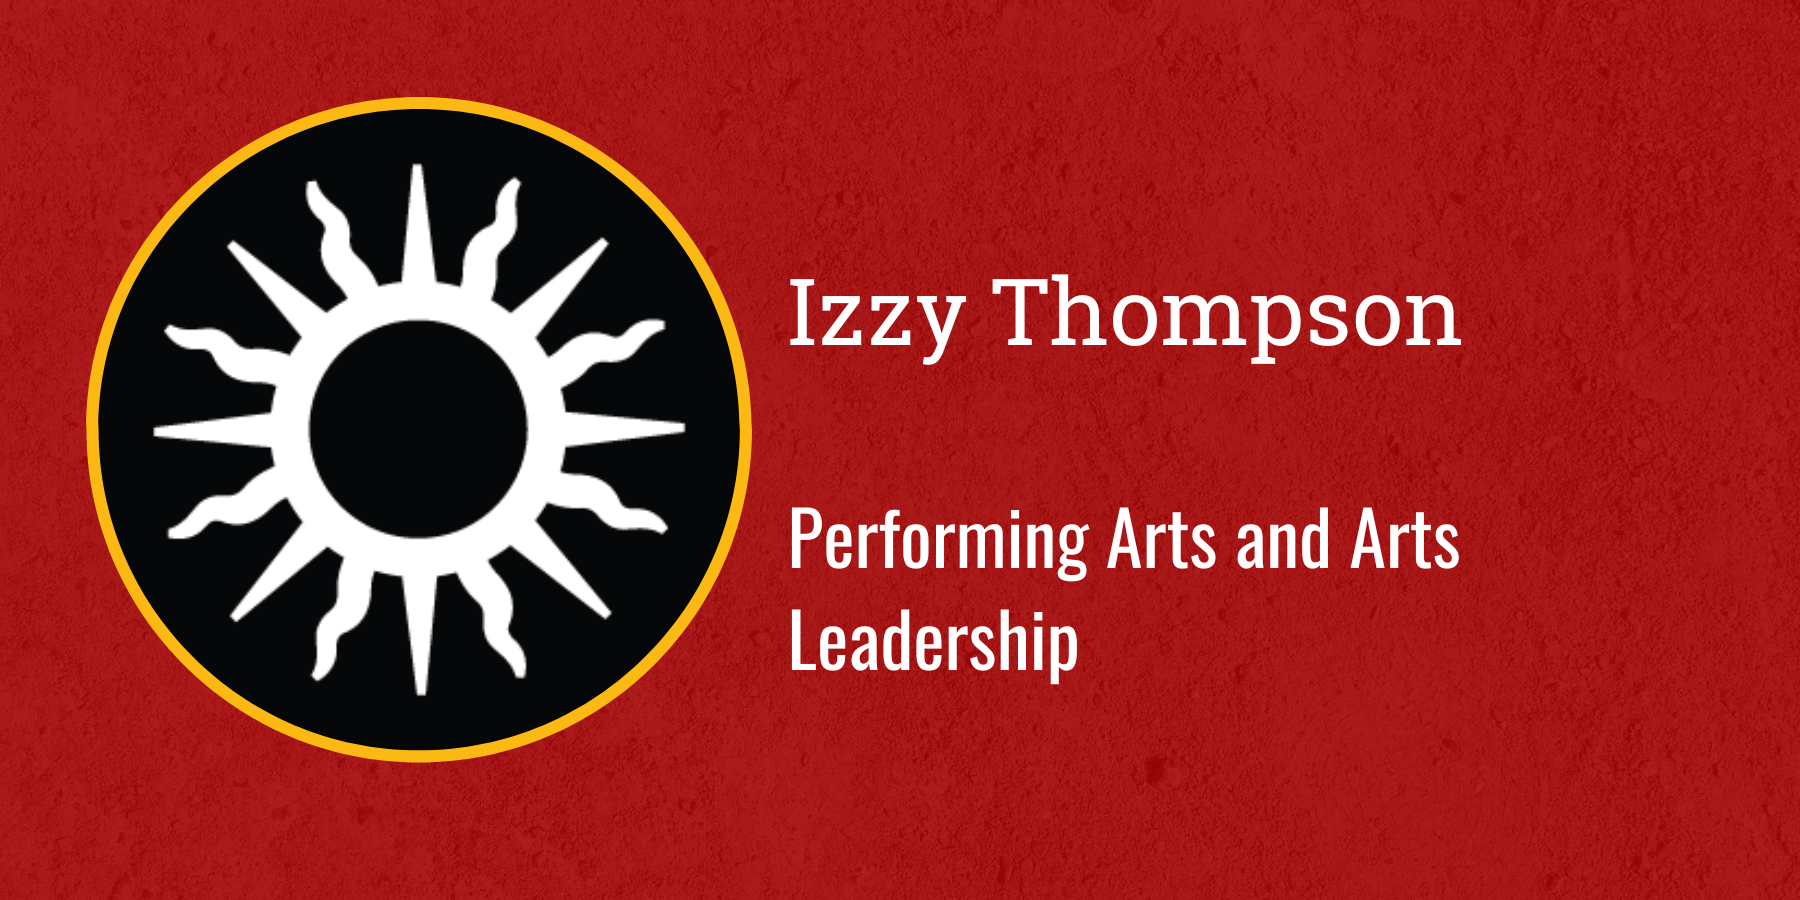 Izzy Thompson
Performing Arts and Arts Leadership 
